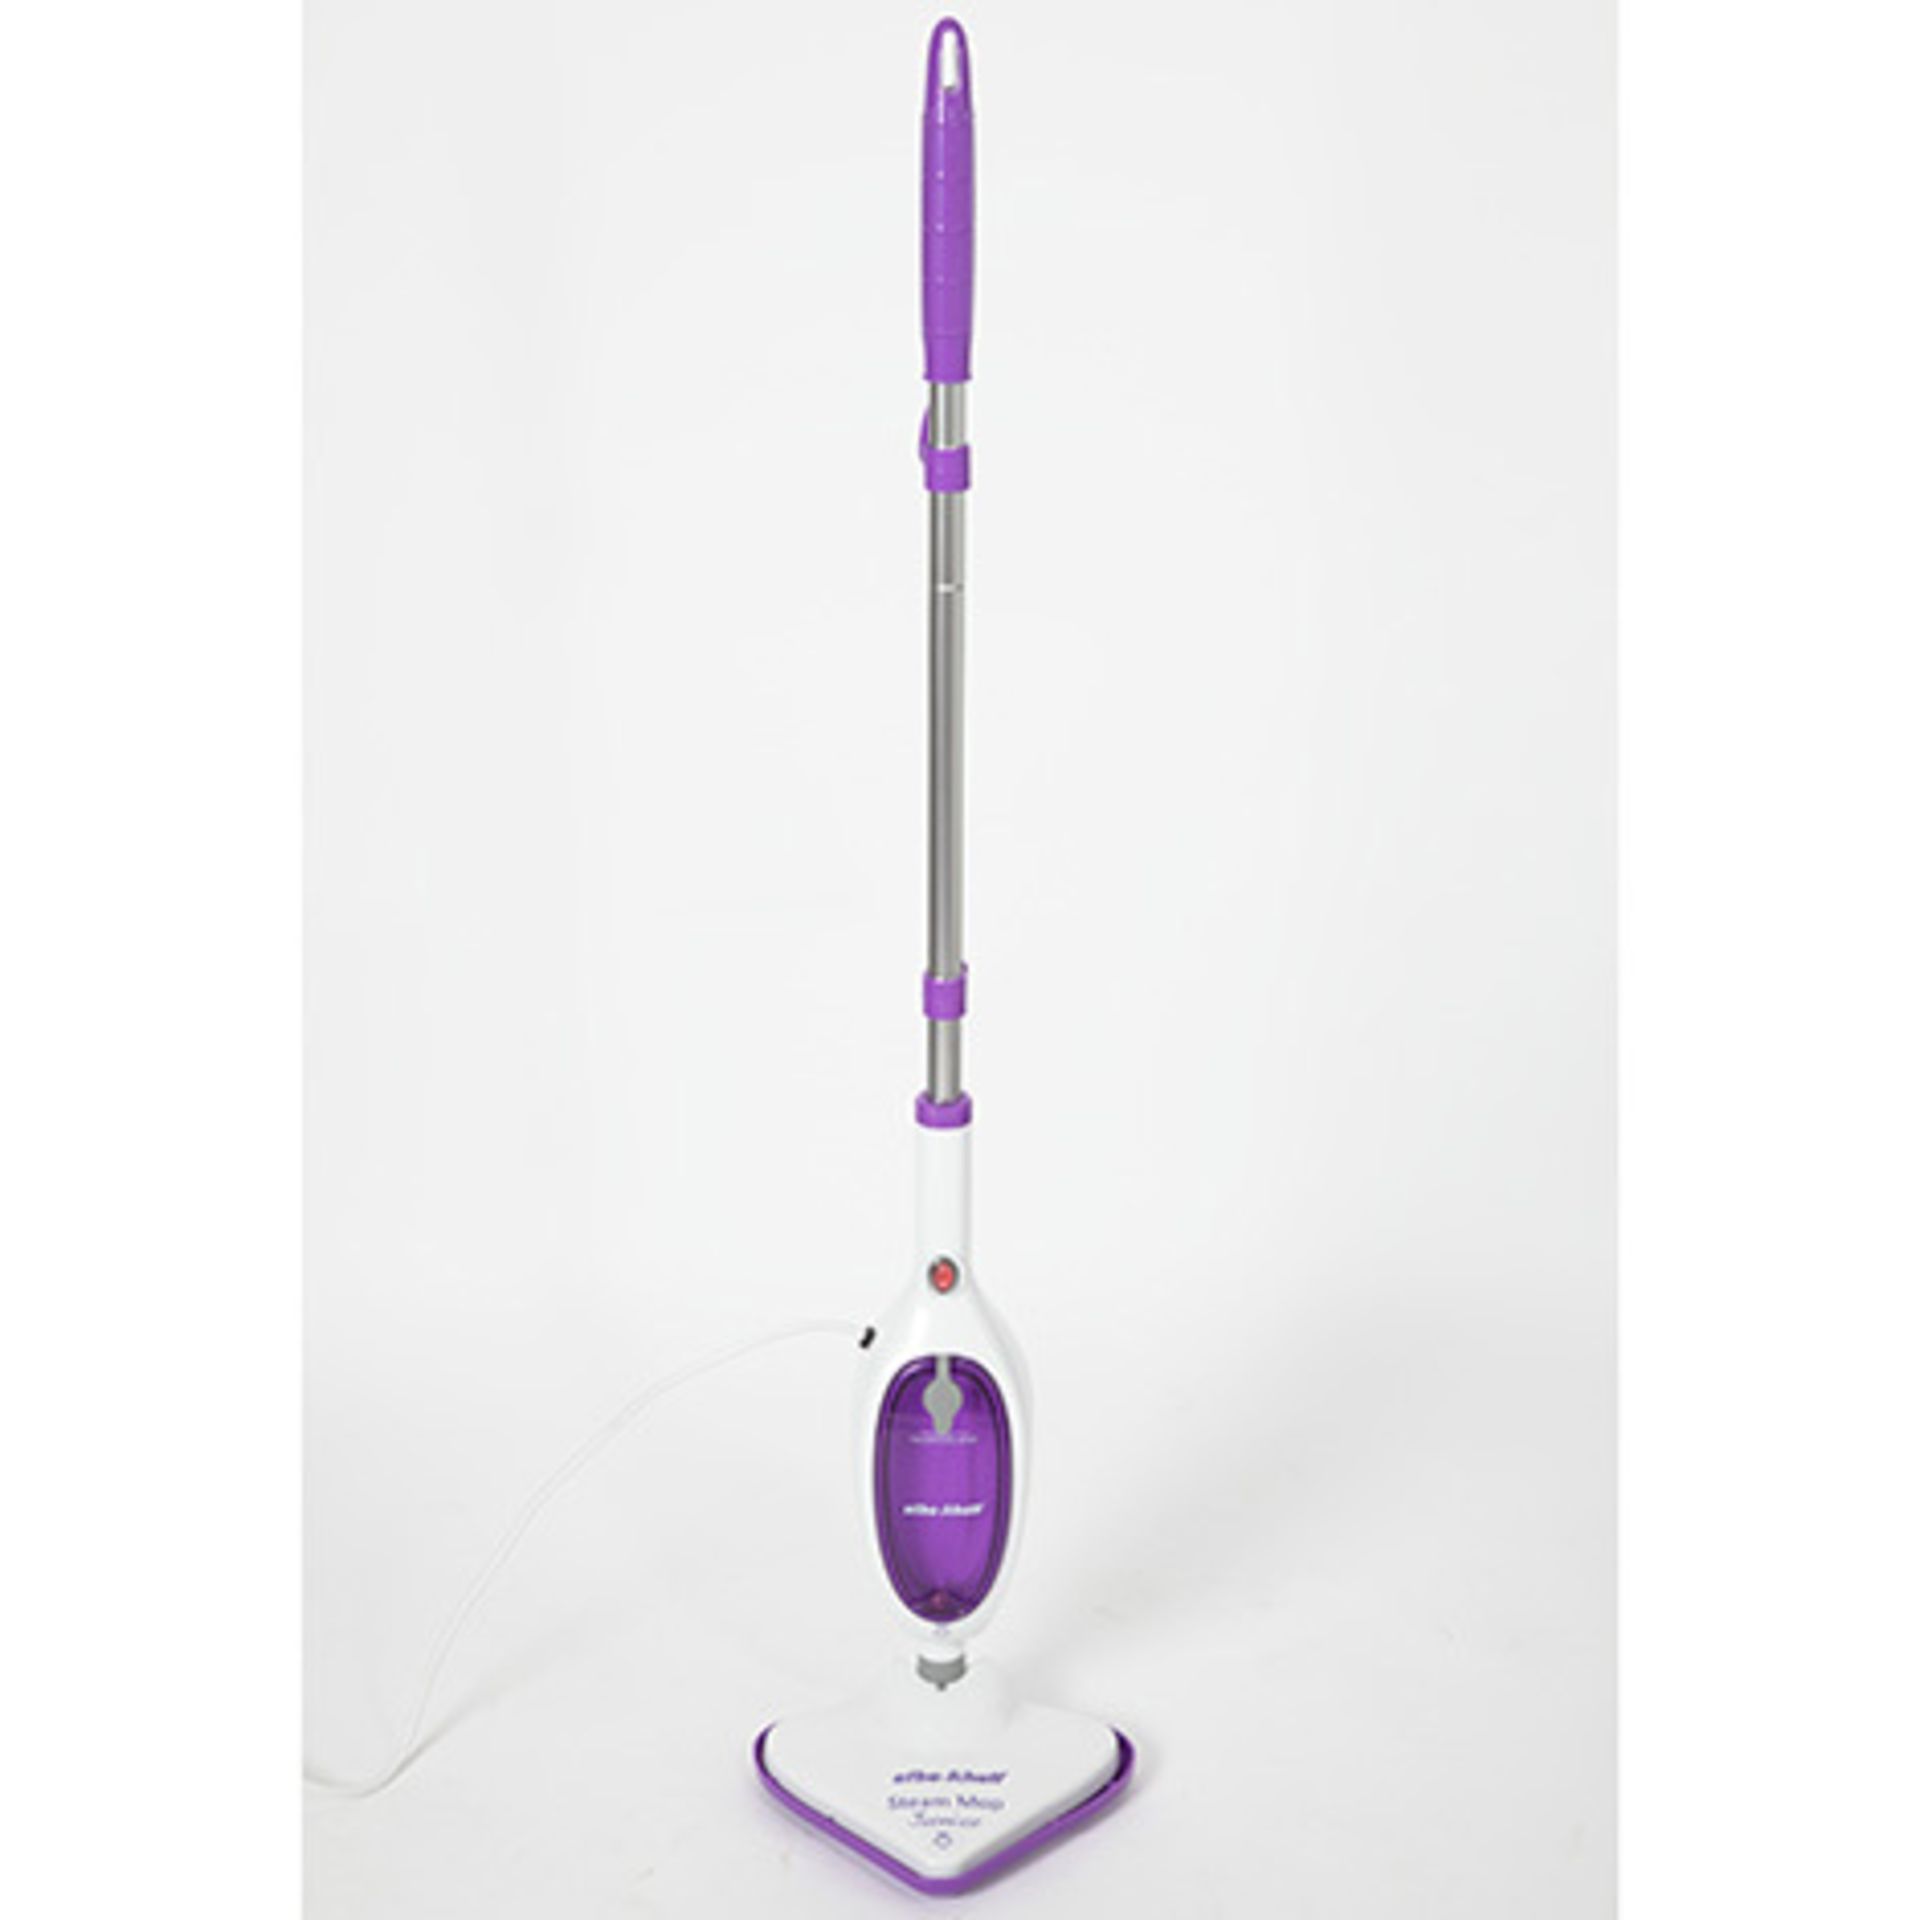 V EFBE 1300watt Steam Mop (colour may vary from picture) Brand New Boxed RRP £59.99 - Image 3 of 4